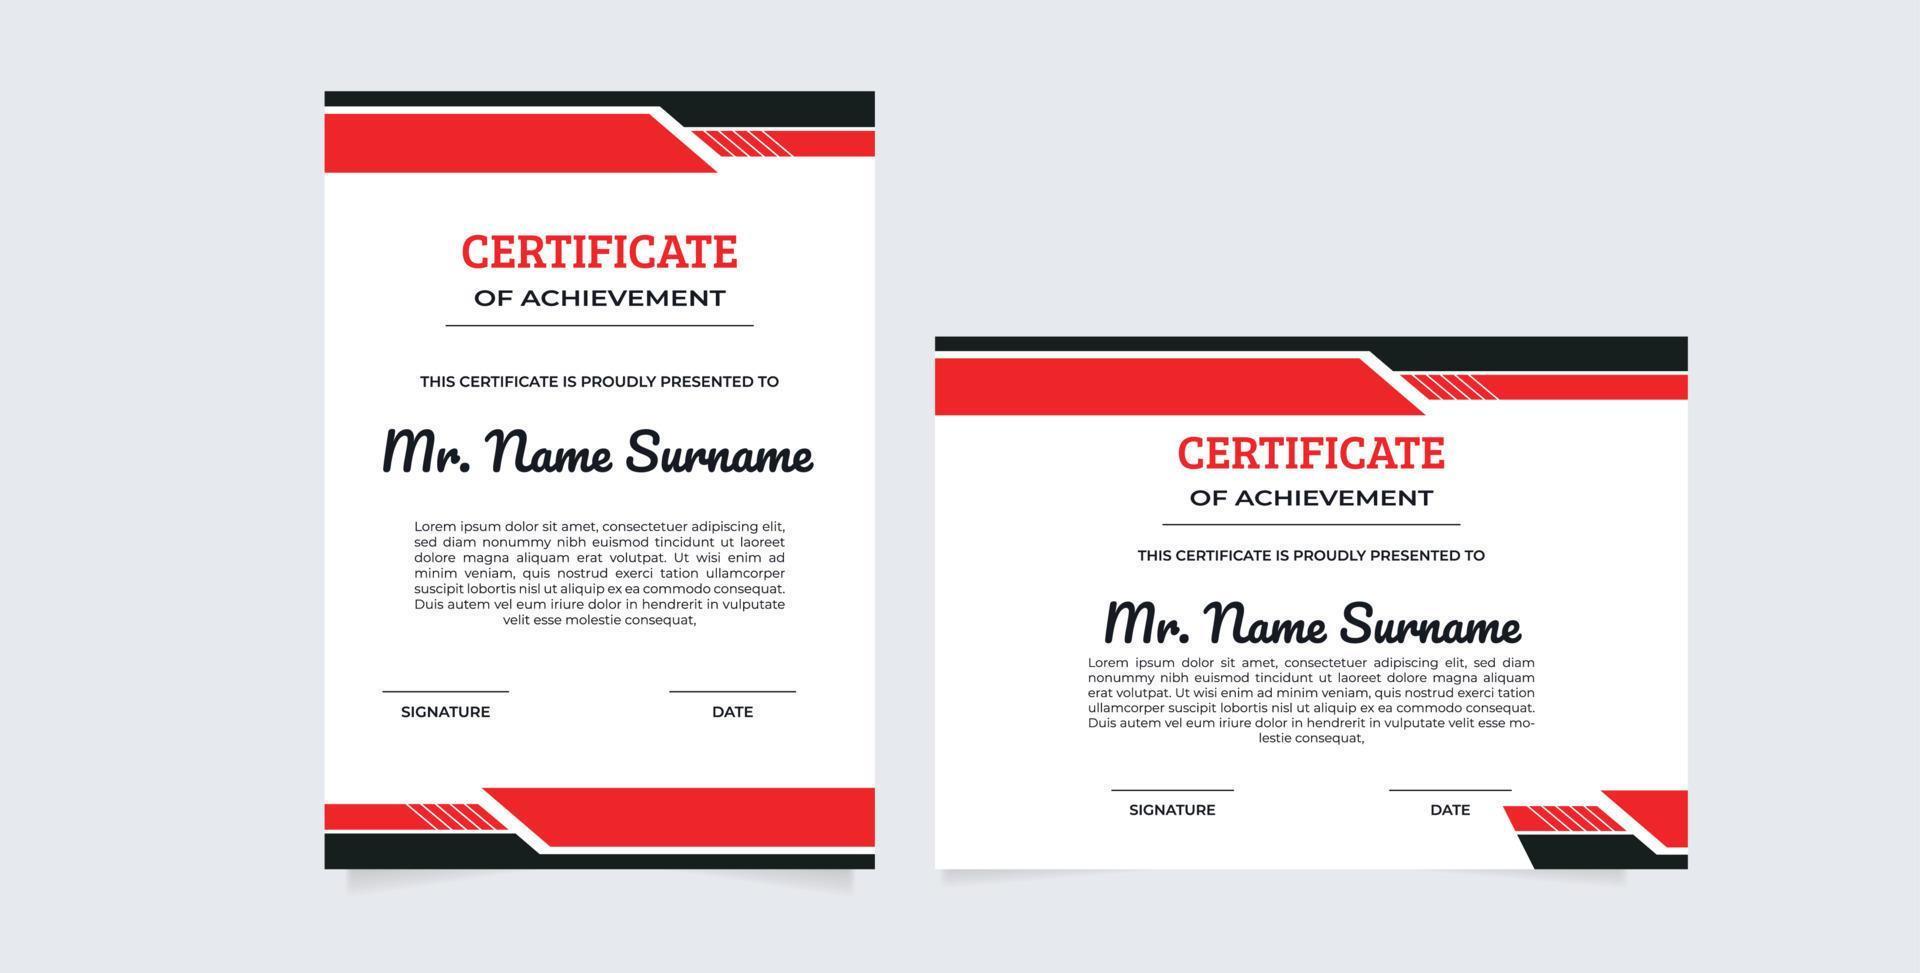 certificate of appreciation border template with luxury badge and modern line and shapes. For award, business, and education needs vector